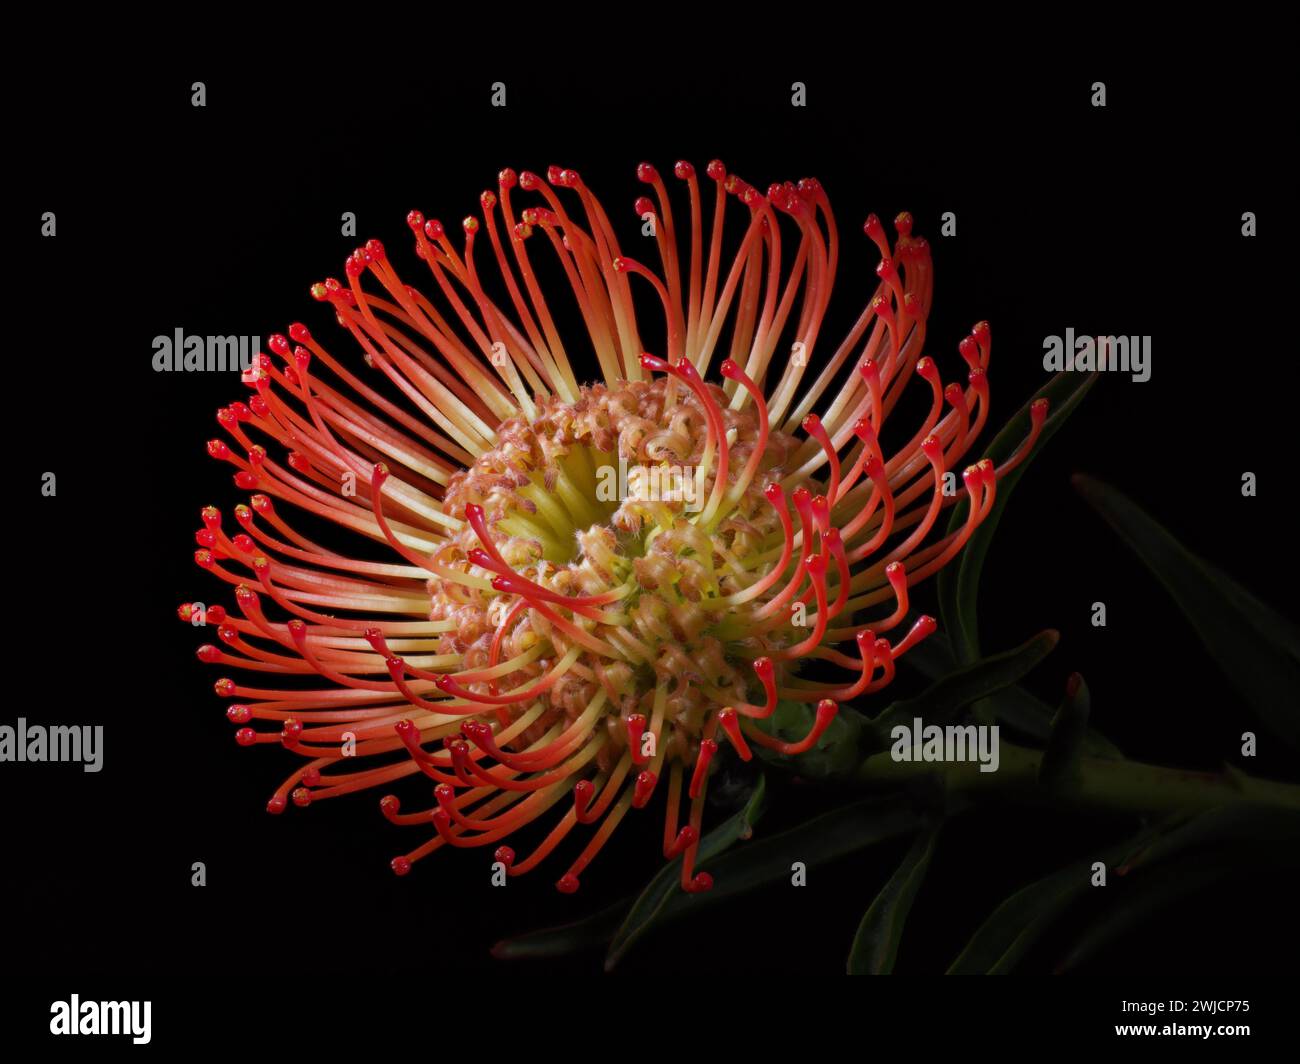 Pincushion protea (Leucospermum species), close-up of a flower, black background, native to South Africa Stock Photo